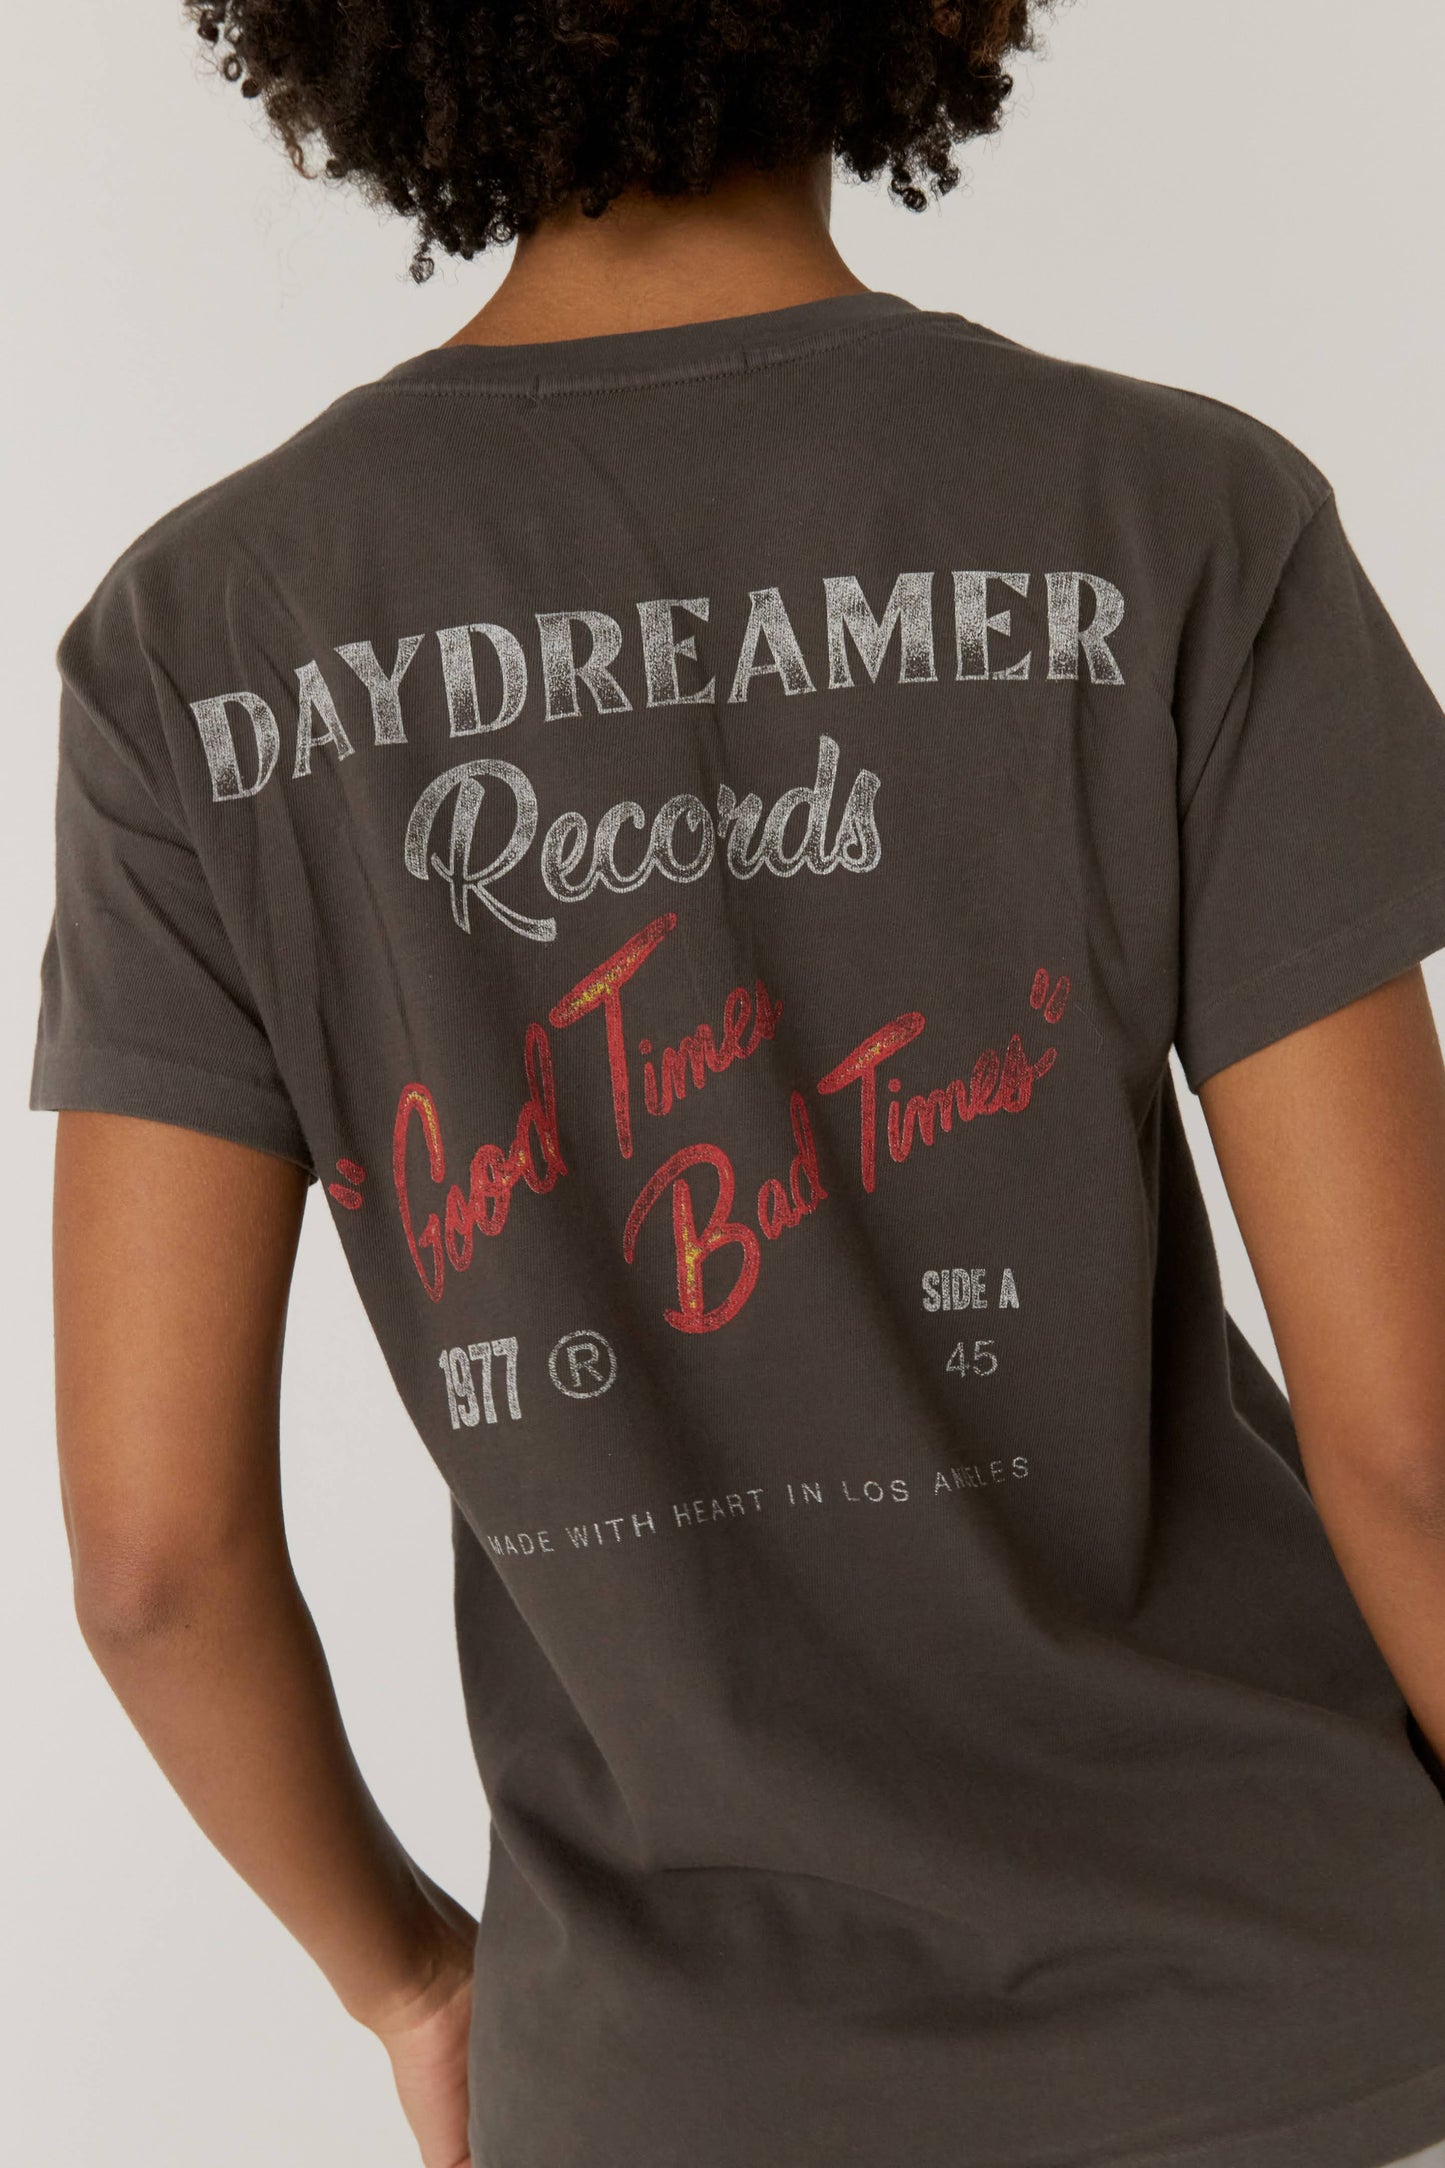 Daydreamer Good Time Bad Times Tour Tee